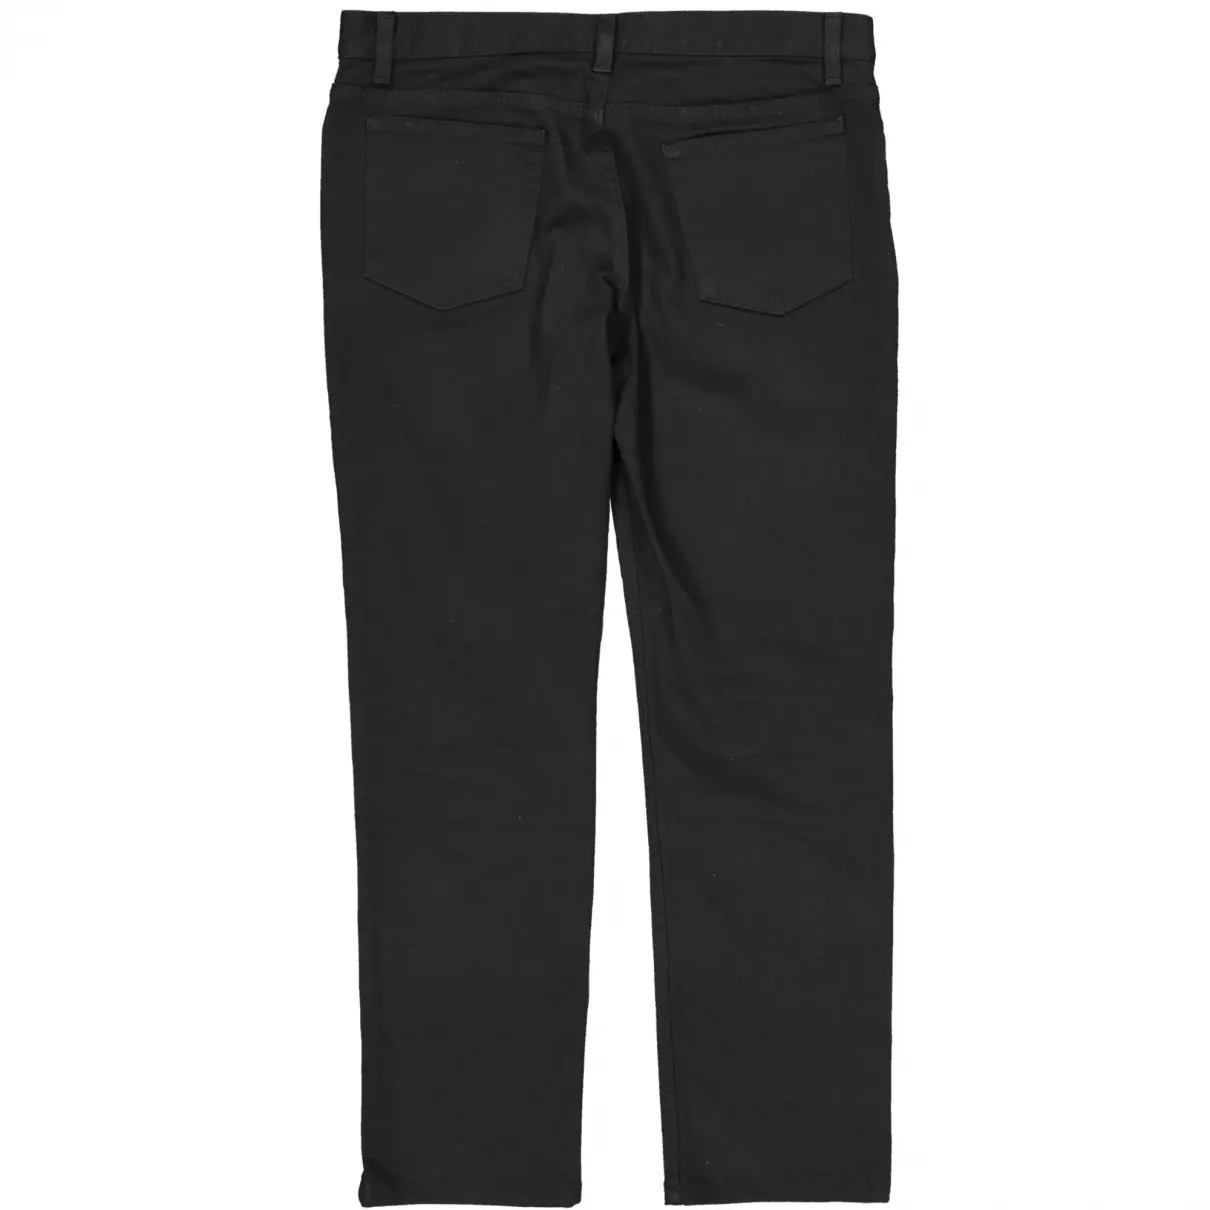 Helmut Lang Straight jeans for sale